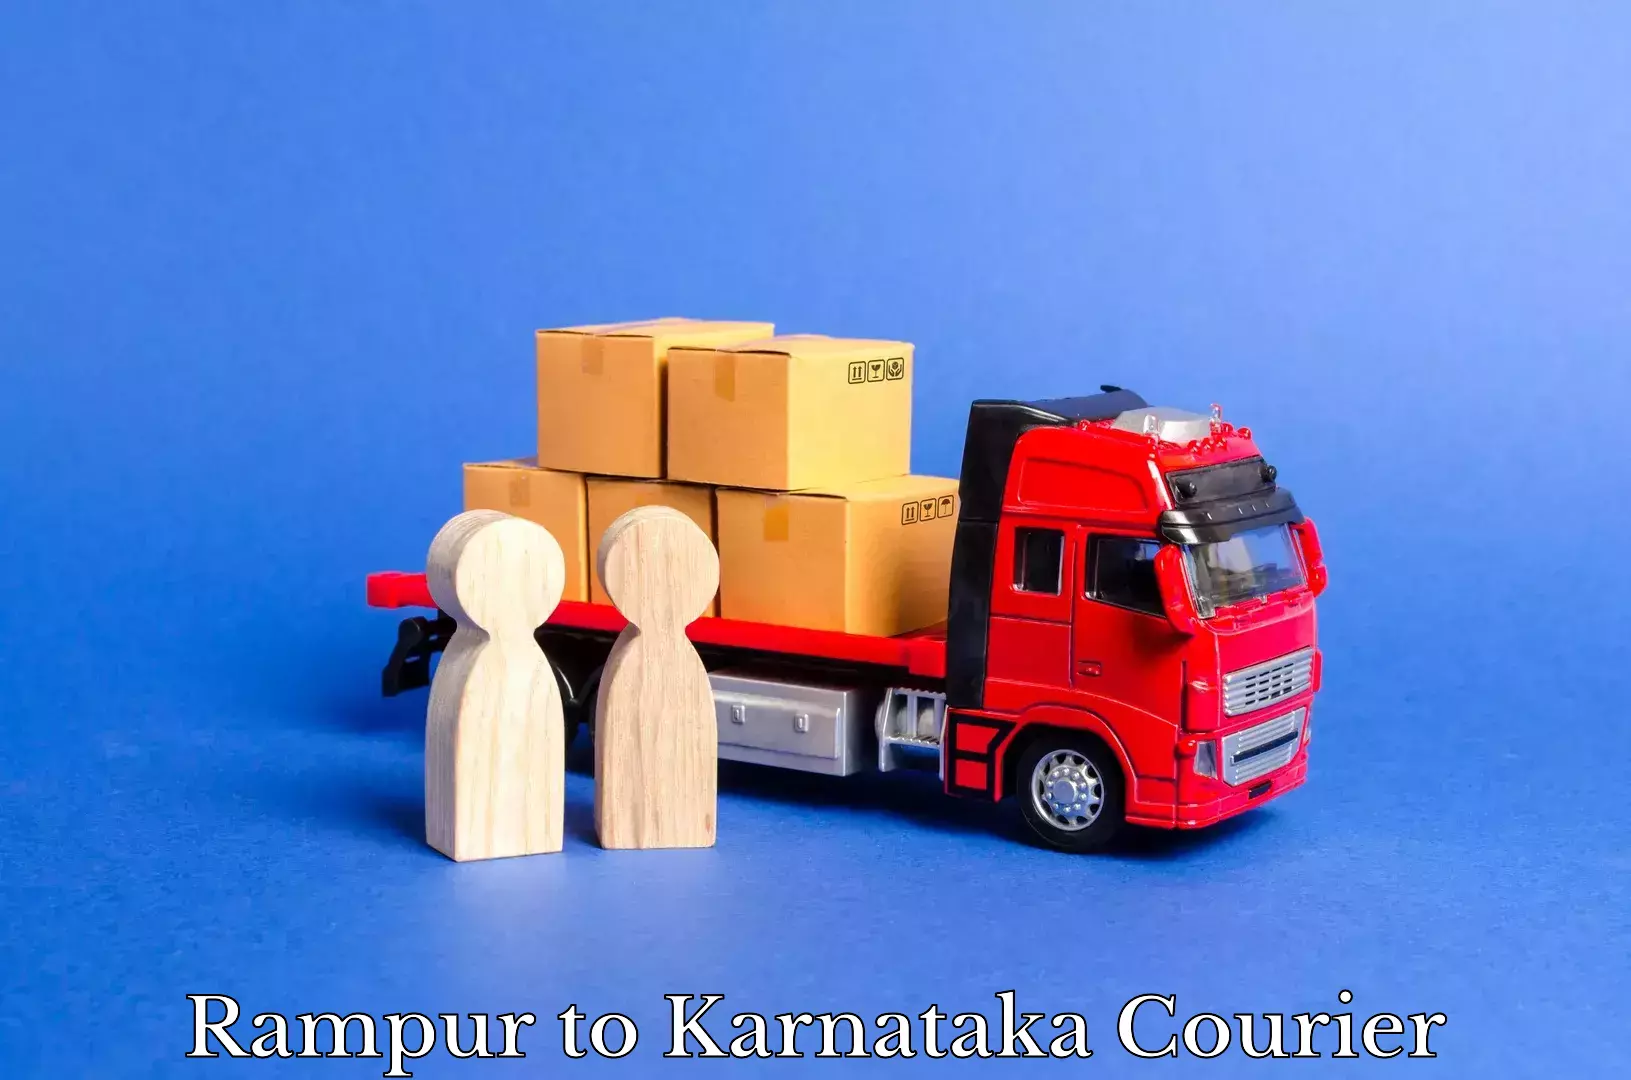 Personalized courier experiences Rampur to Karnataka